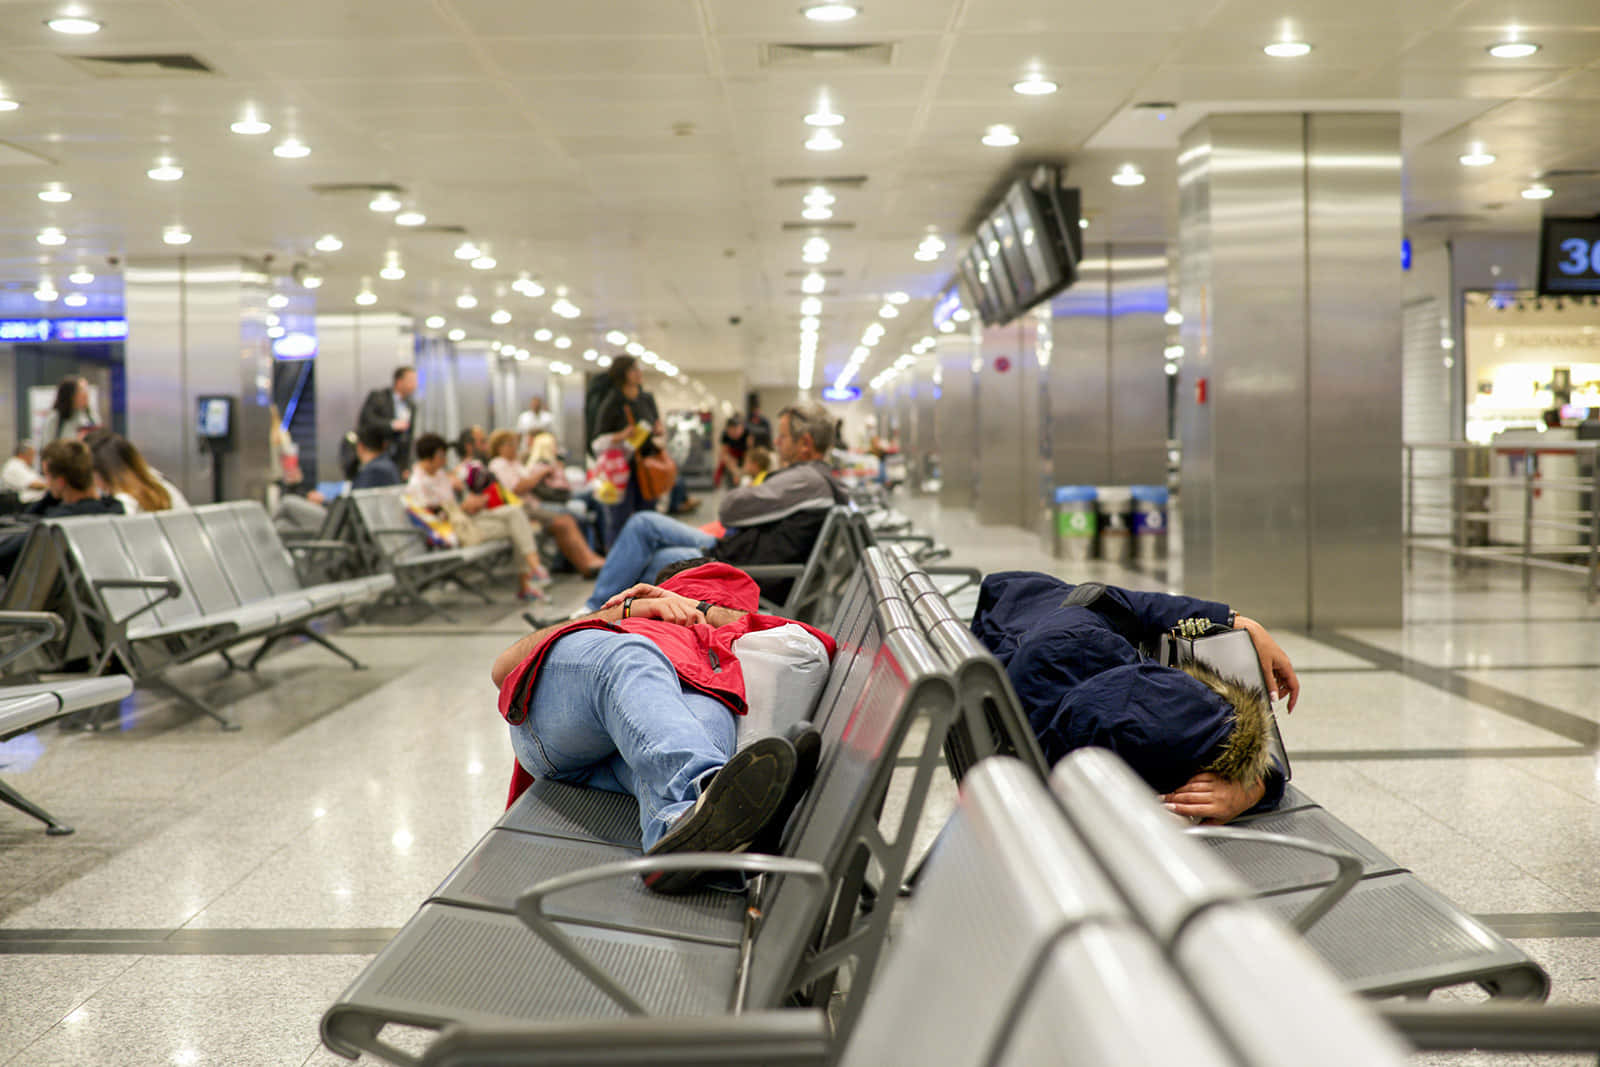 People Are Sleeping In The Airport